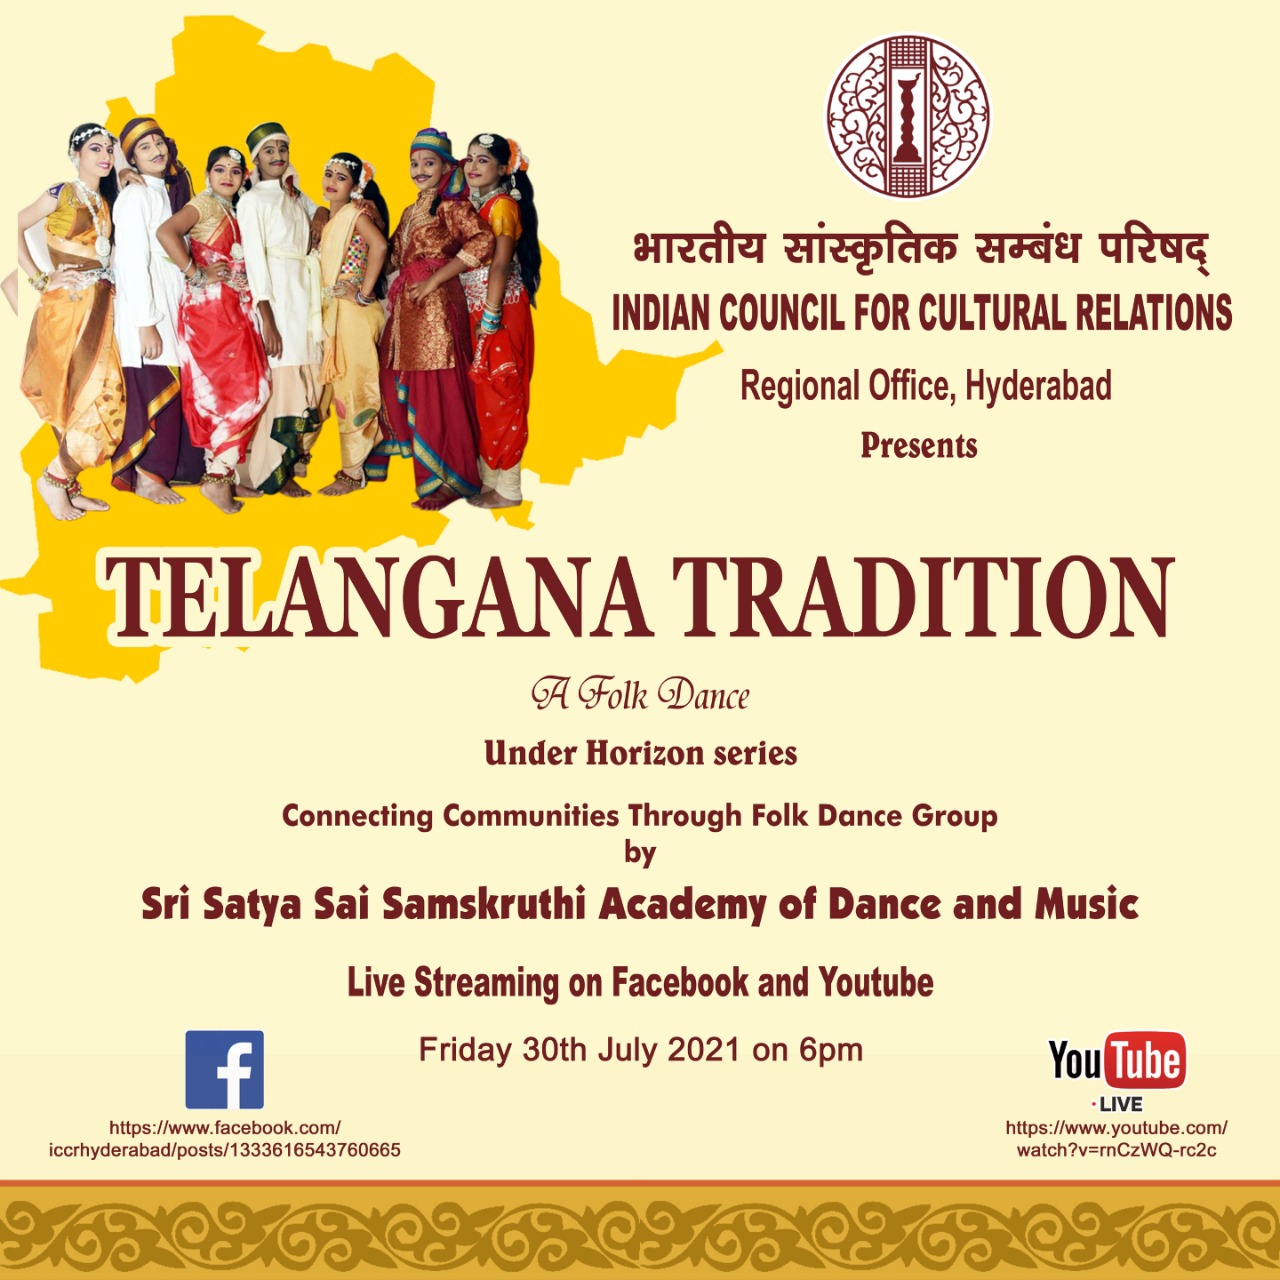 Telangana Tradition - A Folk Dance performance on Friday 30th July, 2021 at 6.00 PM by ICCR Hyderabad live on Facebook & YouTube